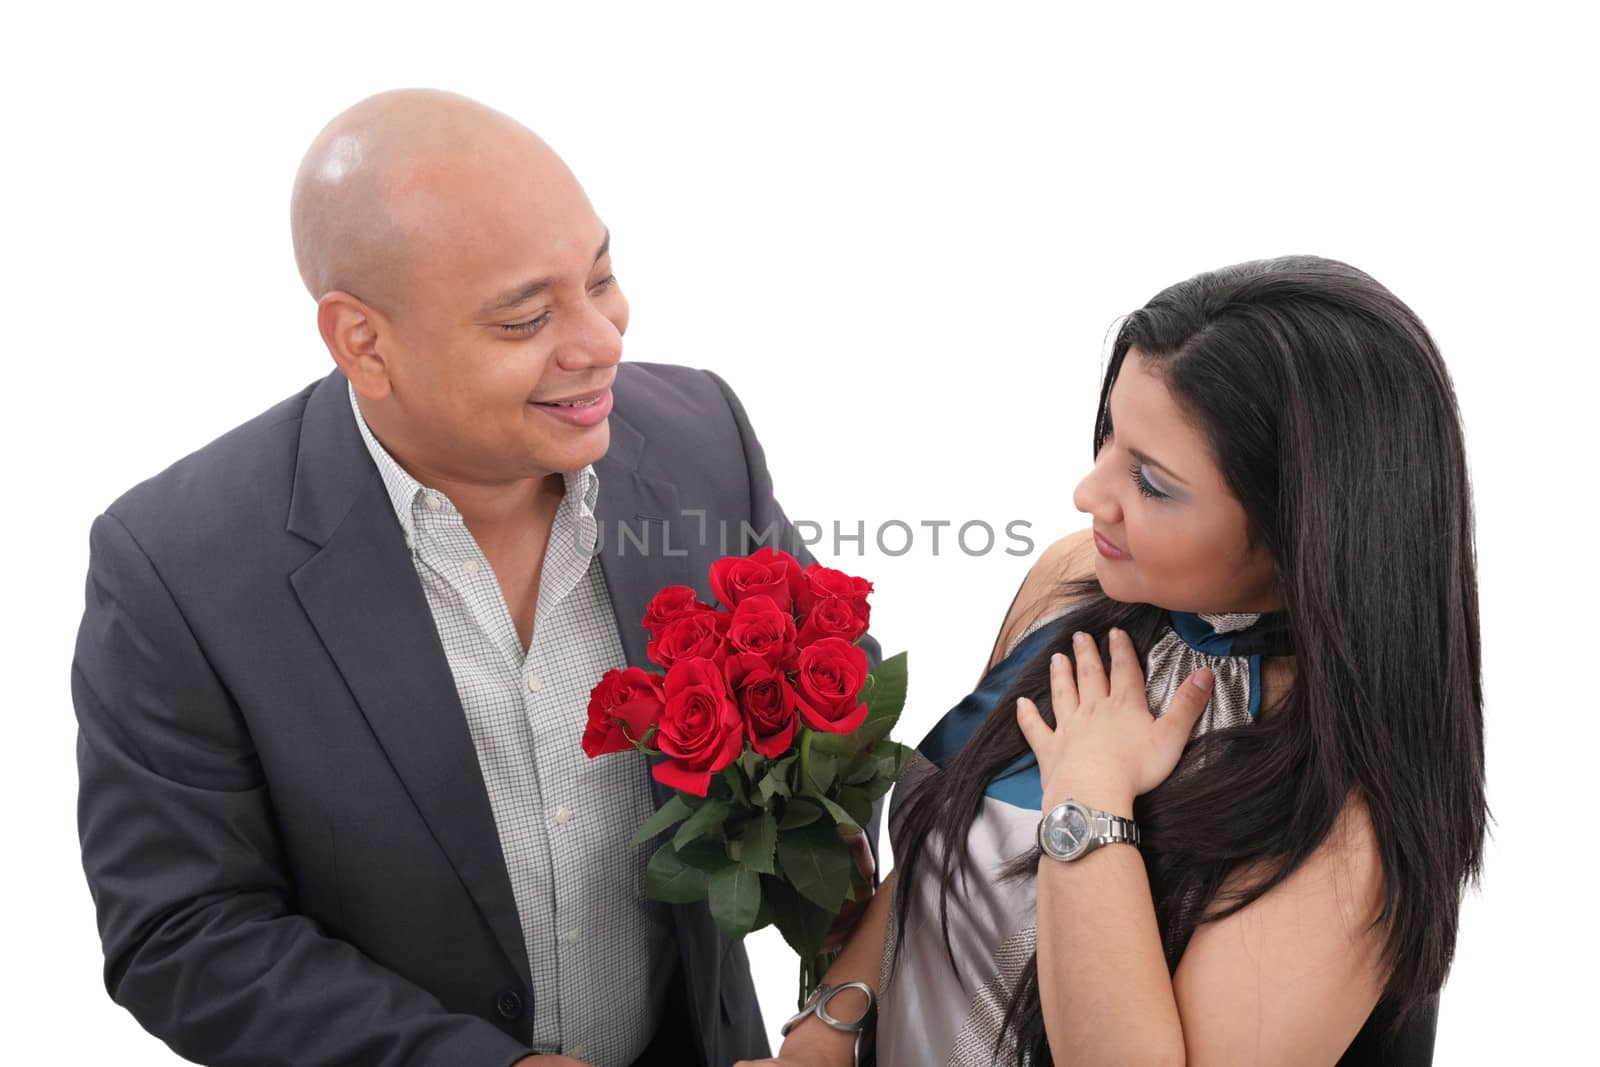 Man dating a girl giving a bouquet of flowers